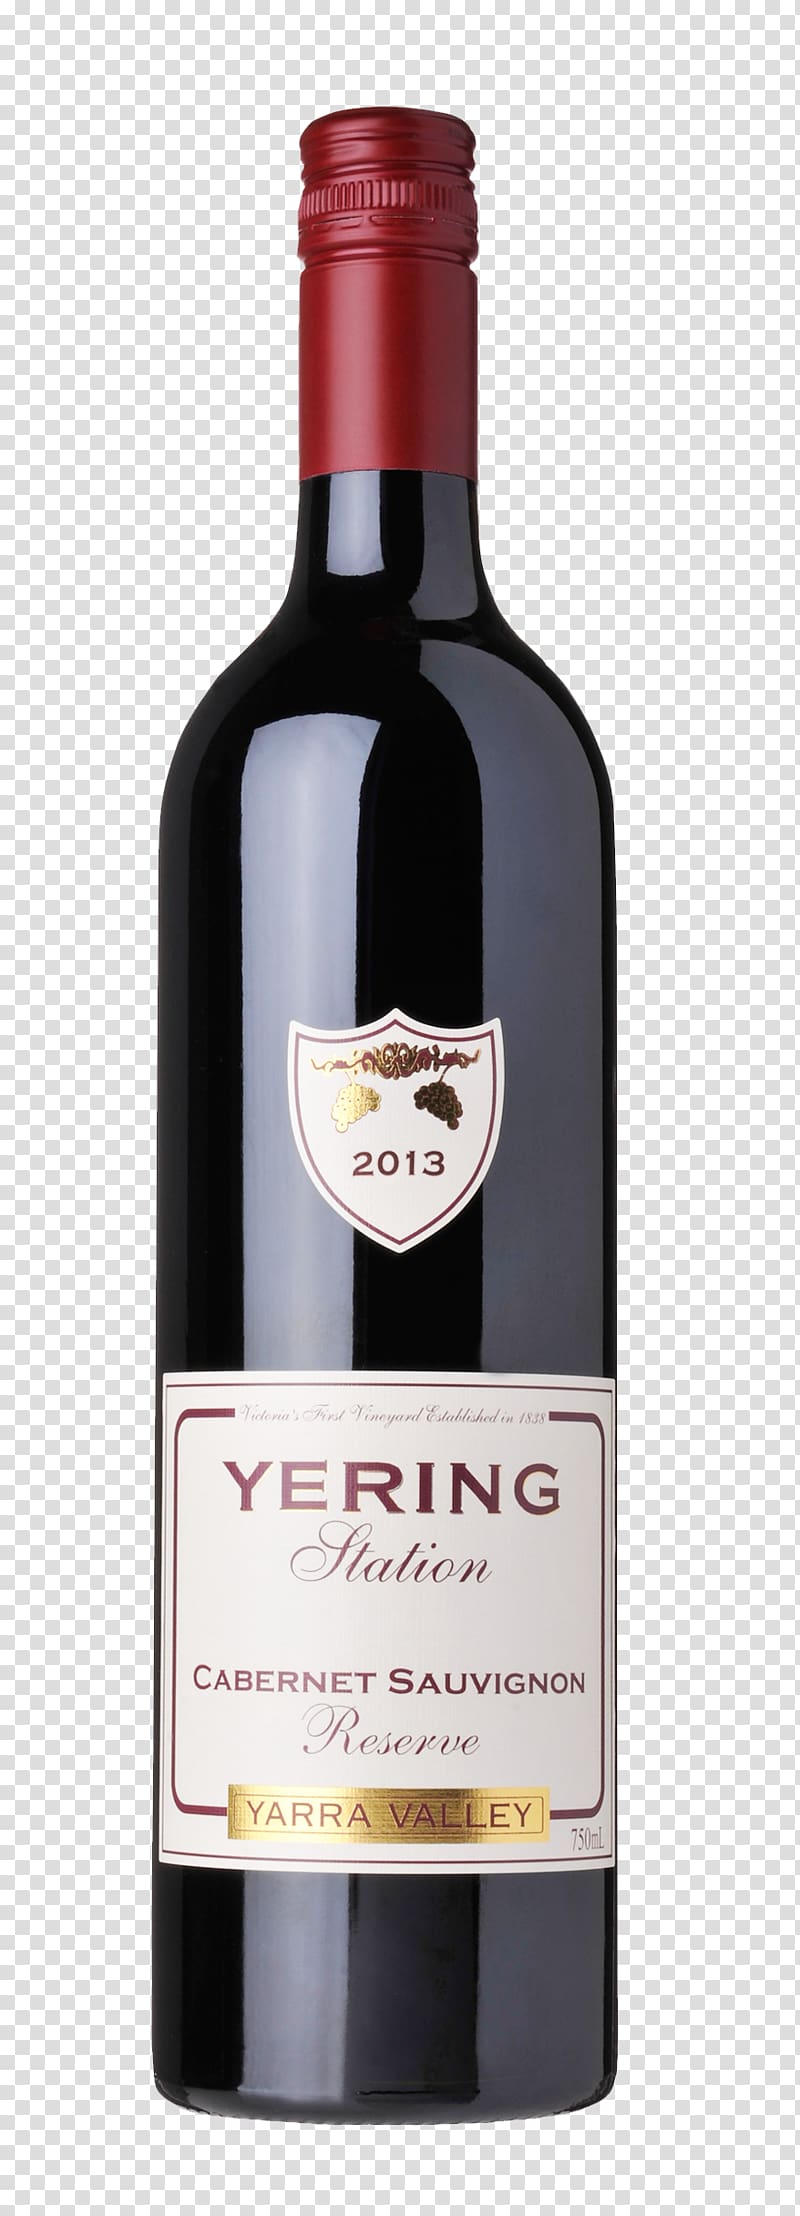 Yering Station Winery Yarra Valley Chardonnay Red Wine, wine transparent background PNG clipart